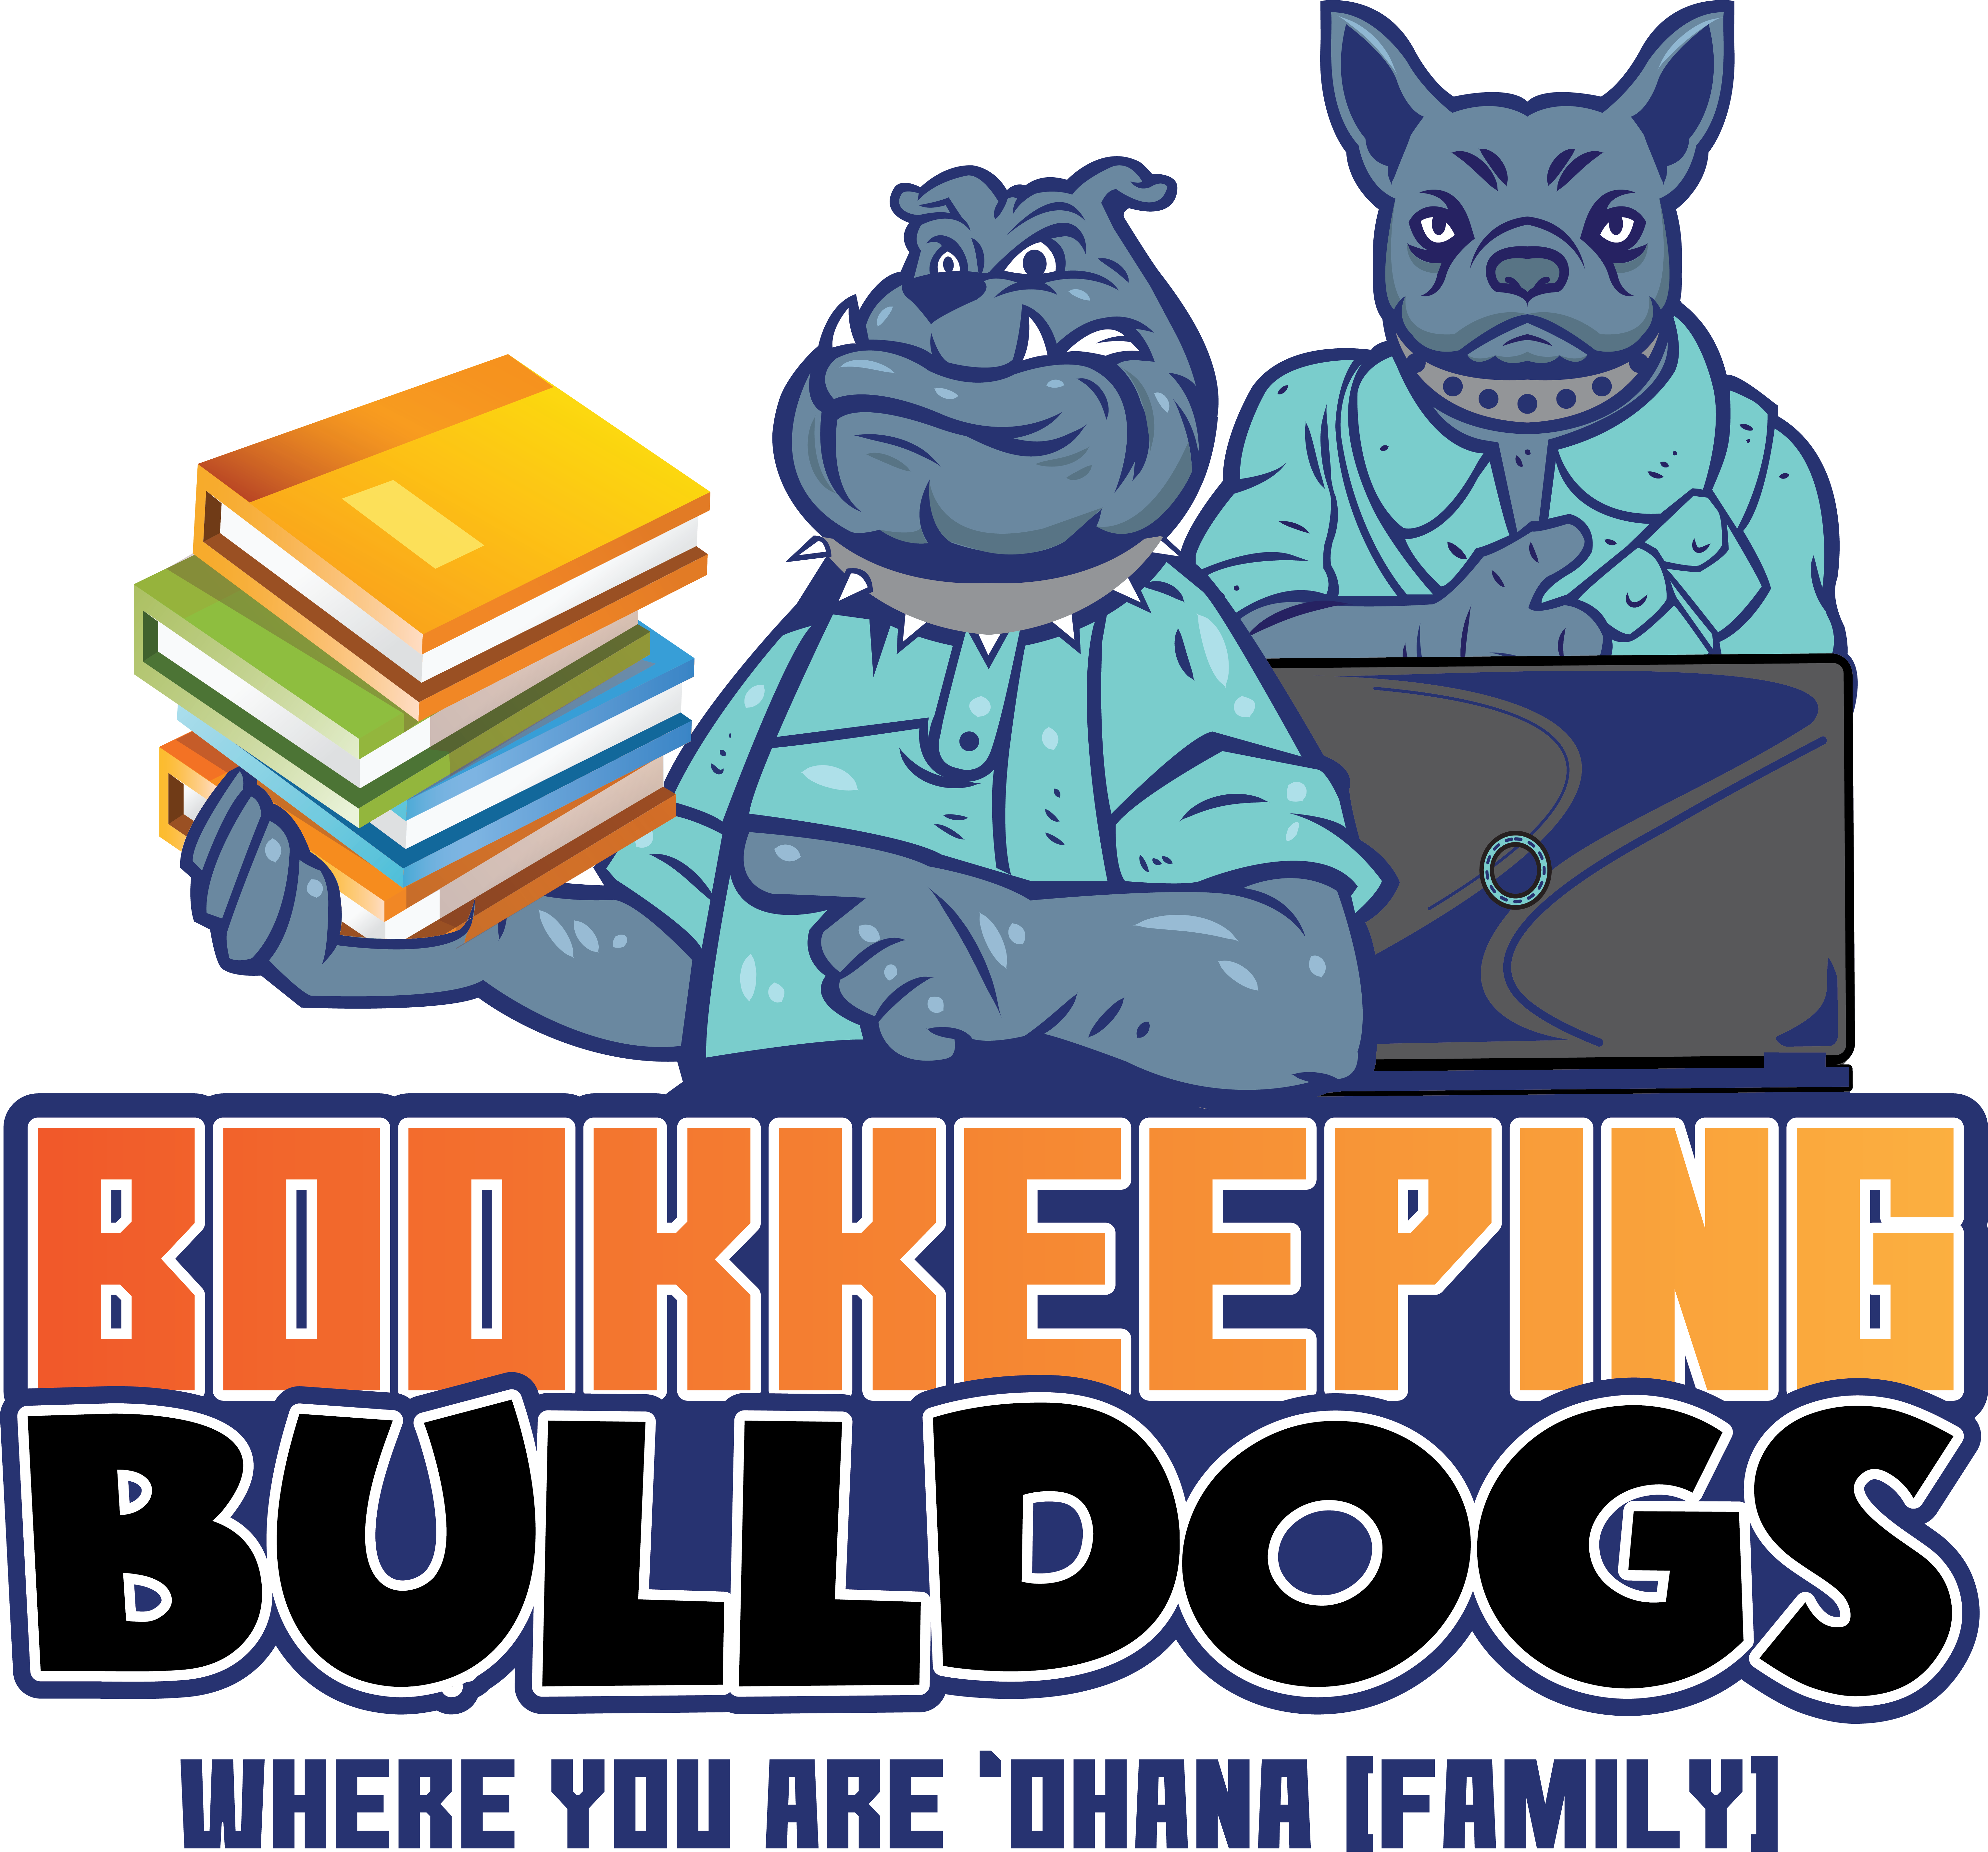 Services bookkeeping bulldogs you. Want clipart tax